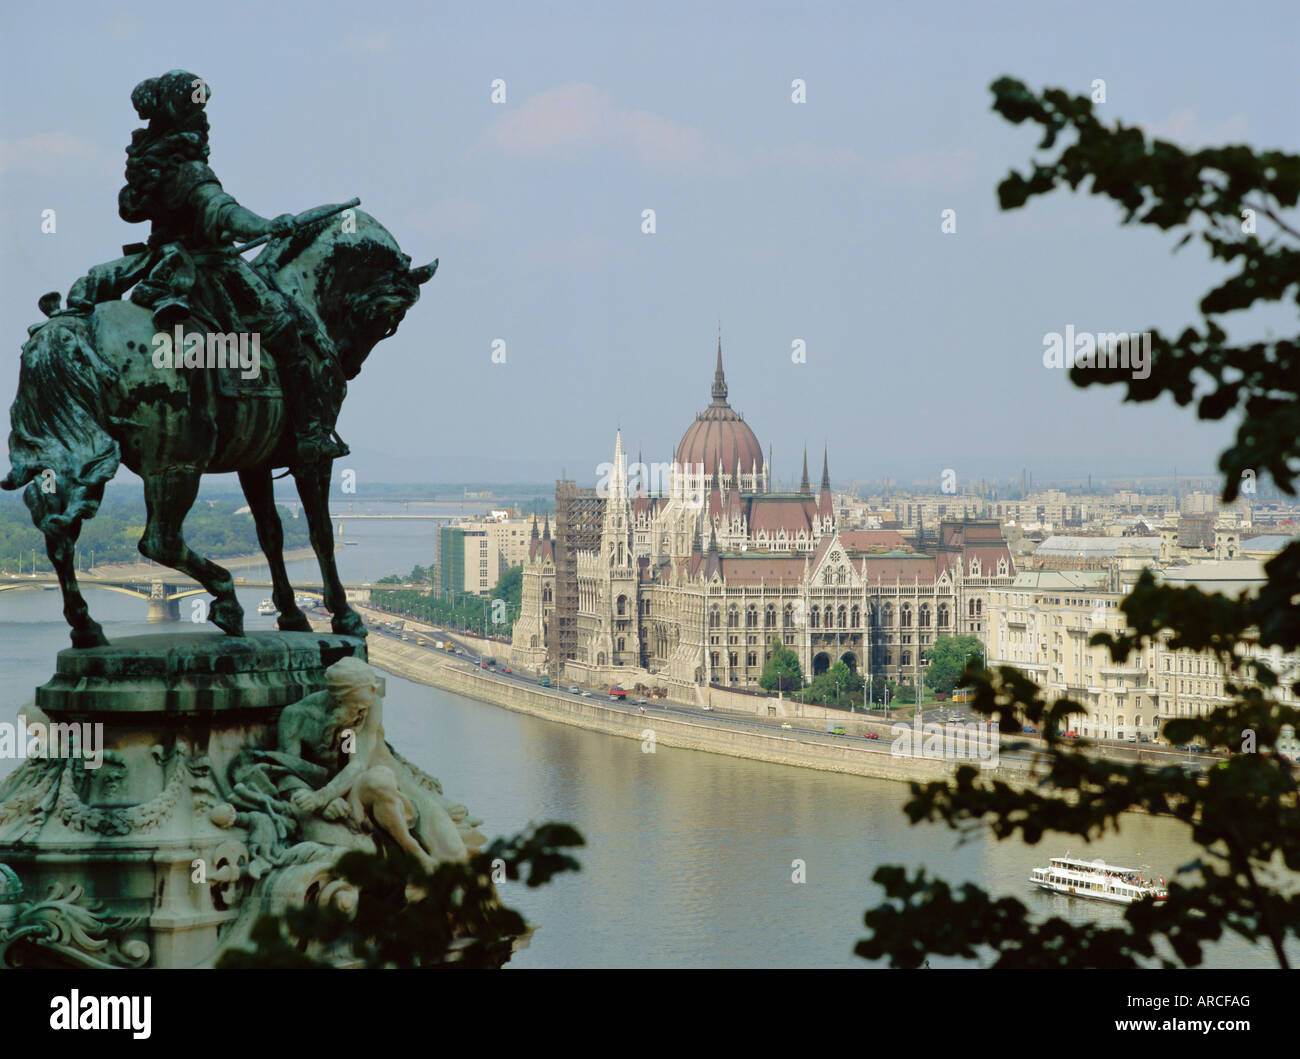 The statue of Eugene of Savoy over looking the Danube, Budapest, Hungary Stock Photo